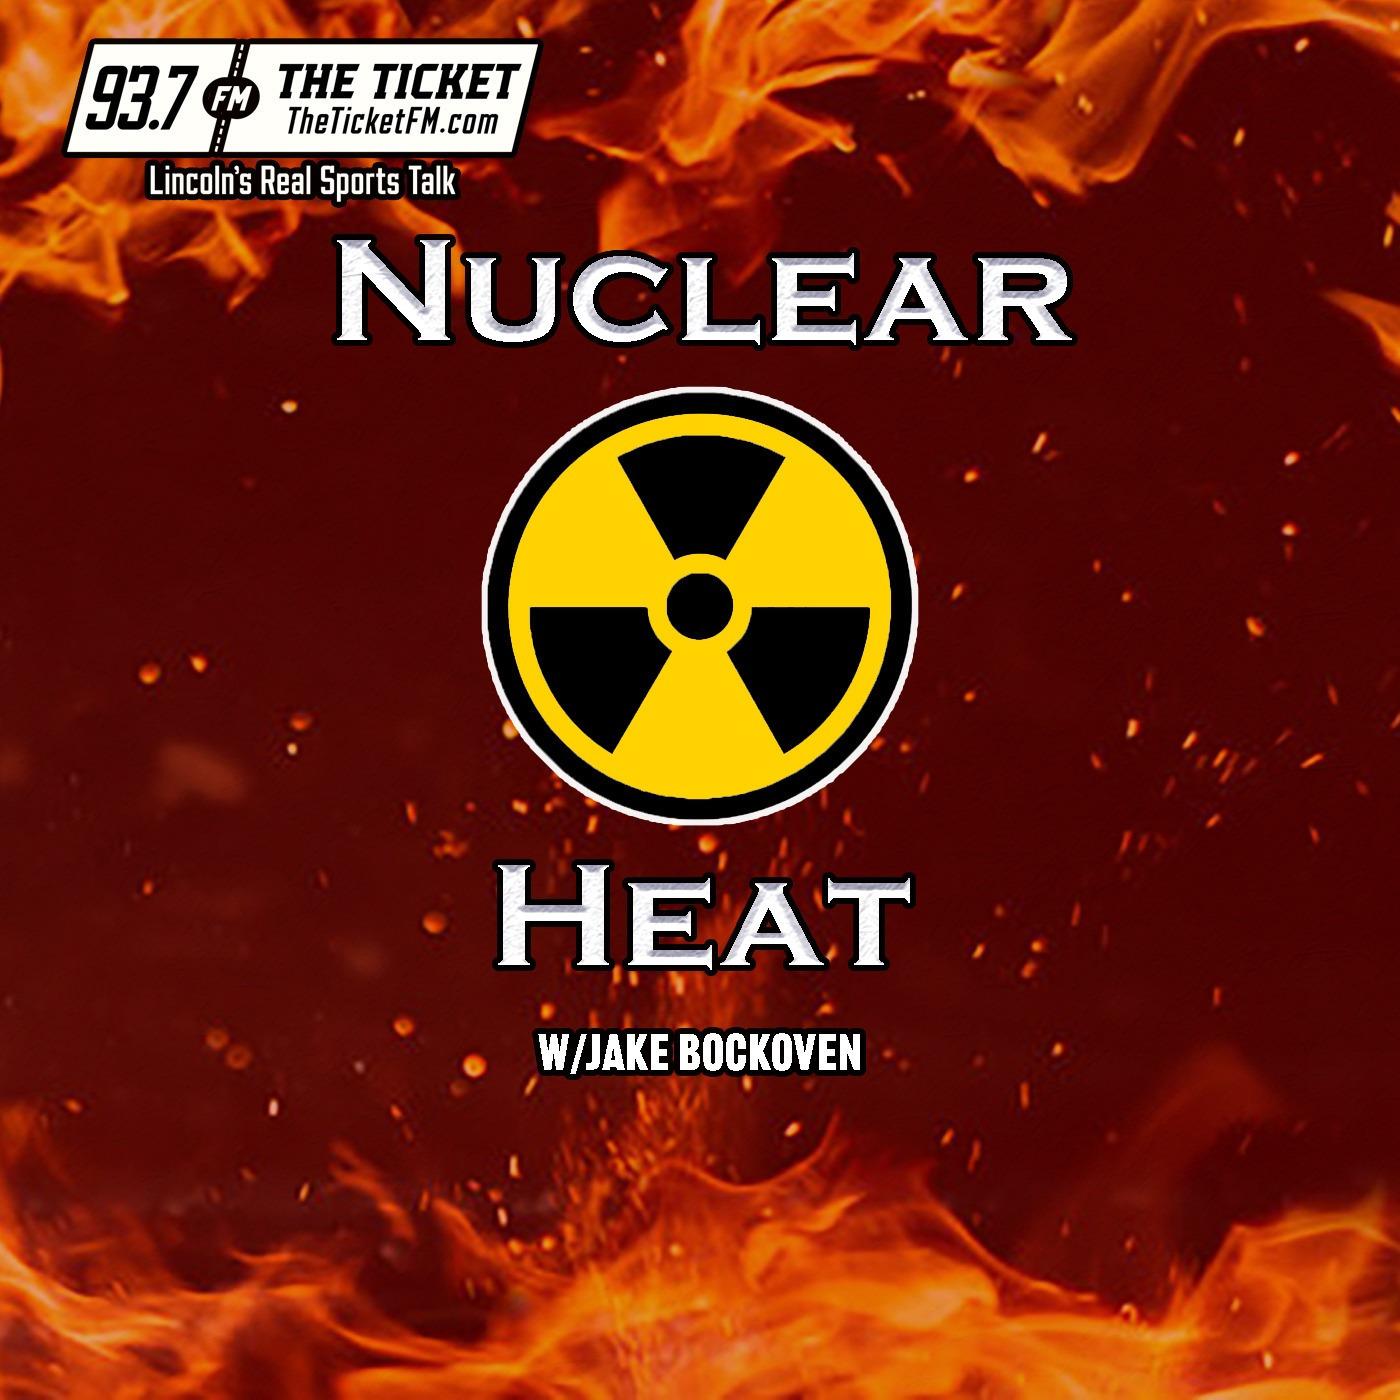 Nuclear Heat - 93.7 The Ticket KNTK